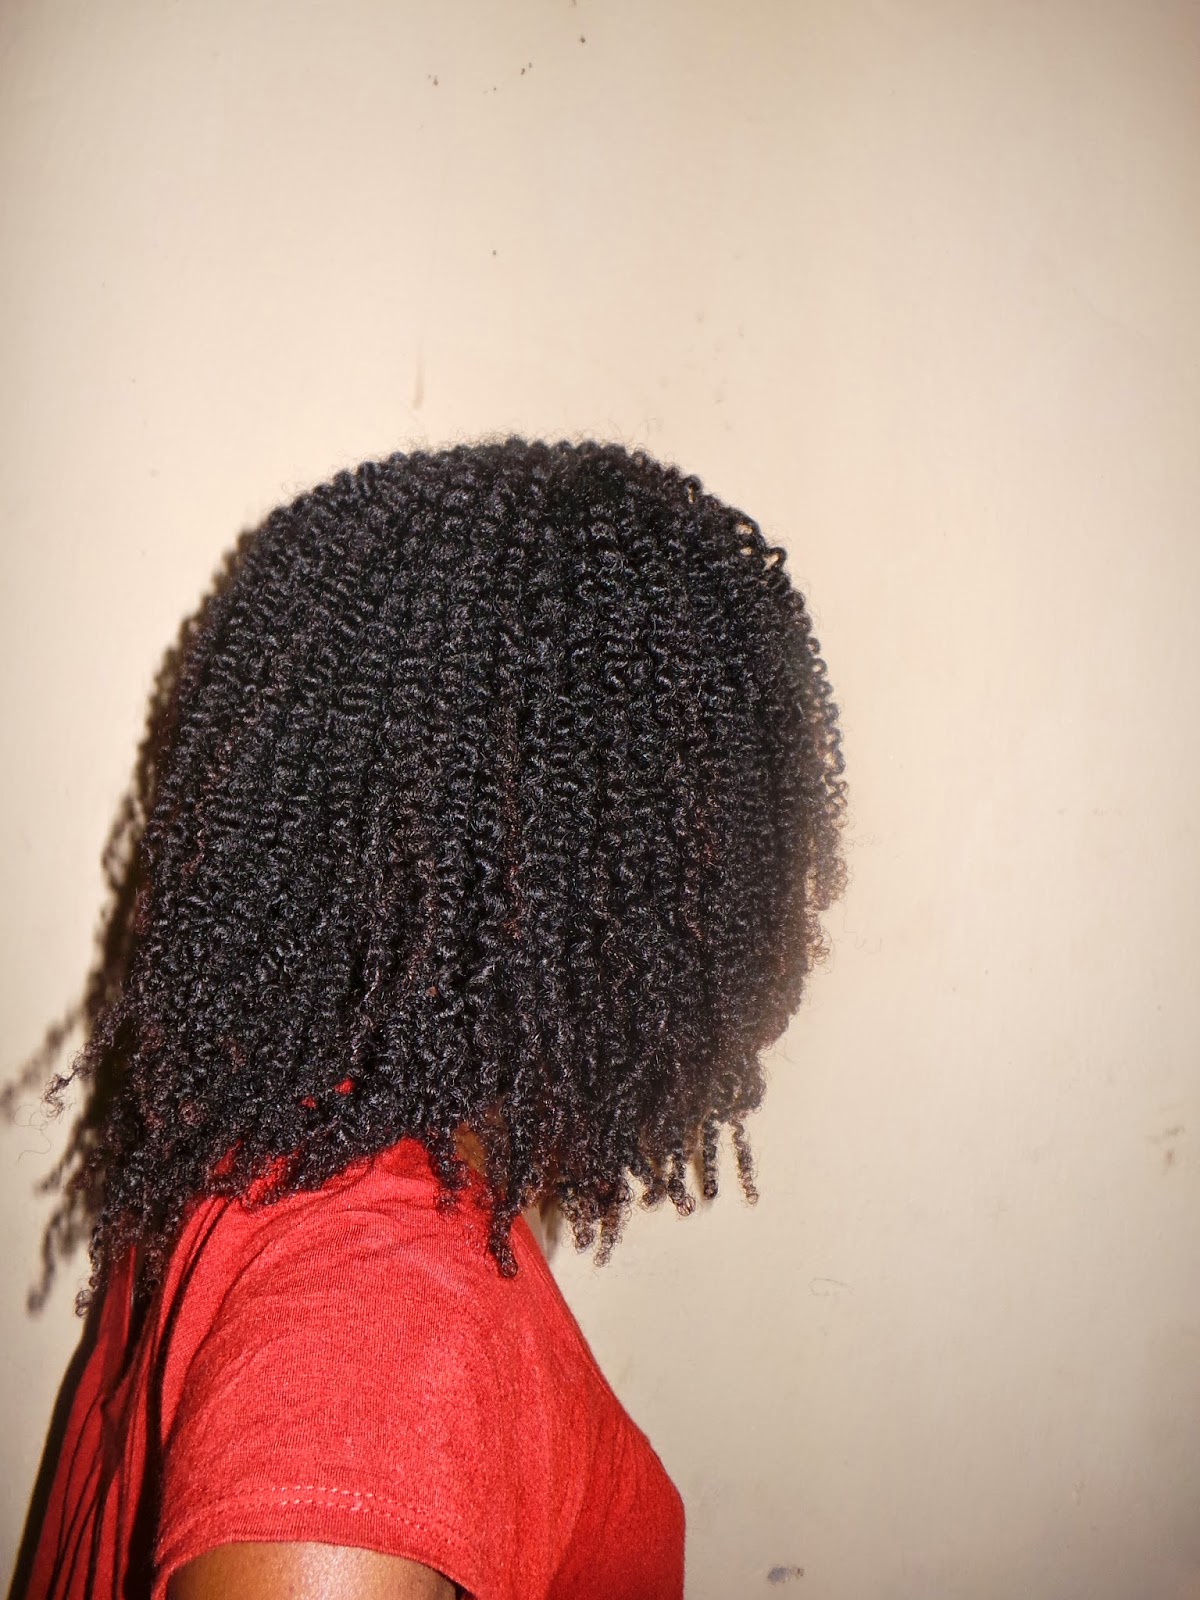 PROTECTIVE STYLING: TEN WAYS TO STYLE YOUR FINE TYPE 4 NATURAL HAIR -  nappilynigeriangirl